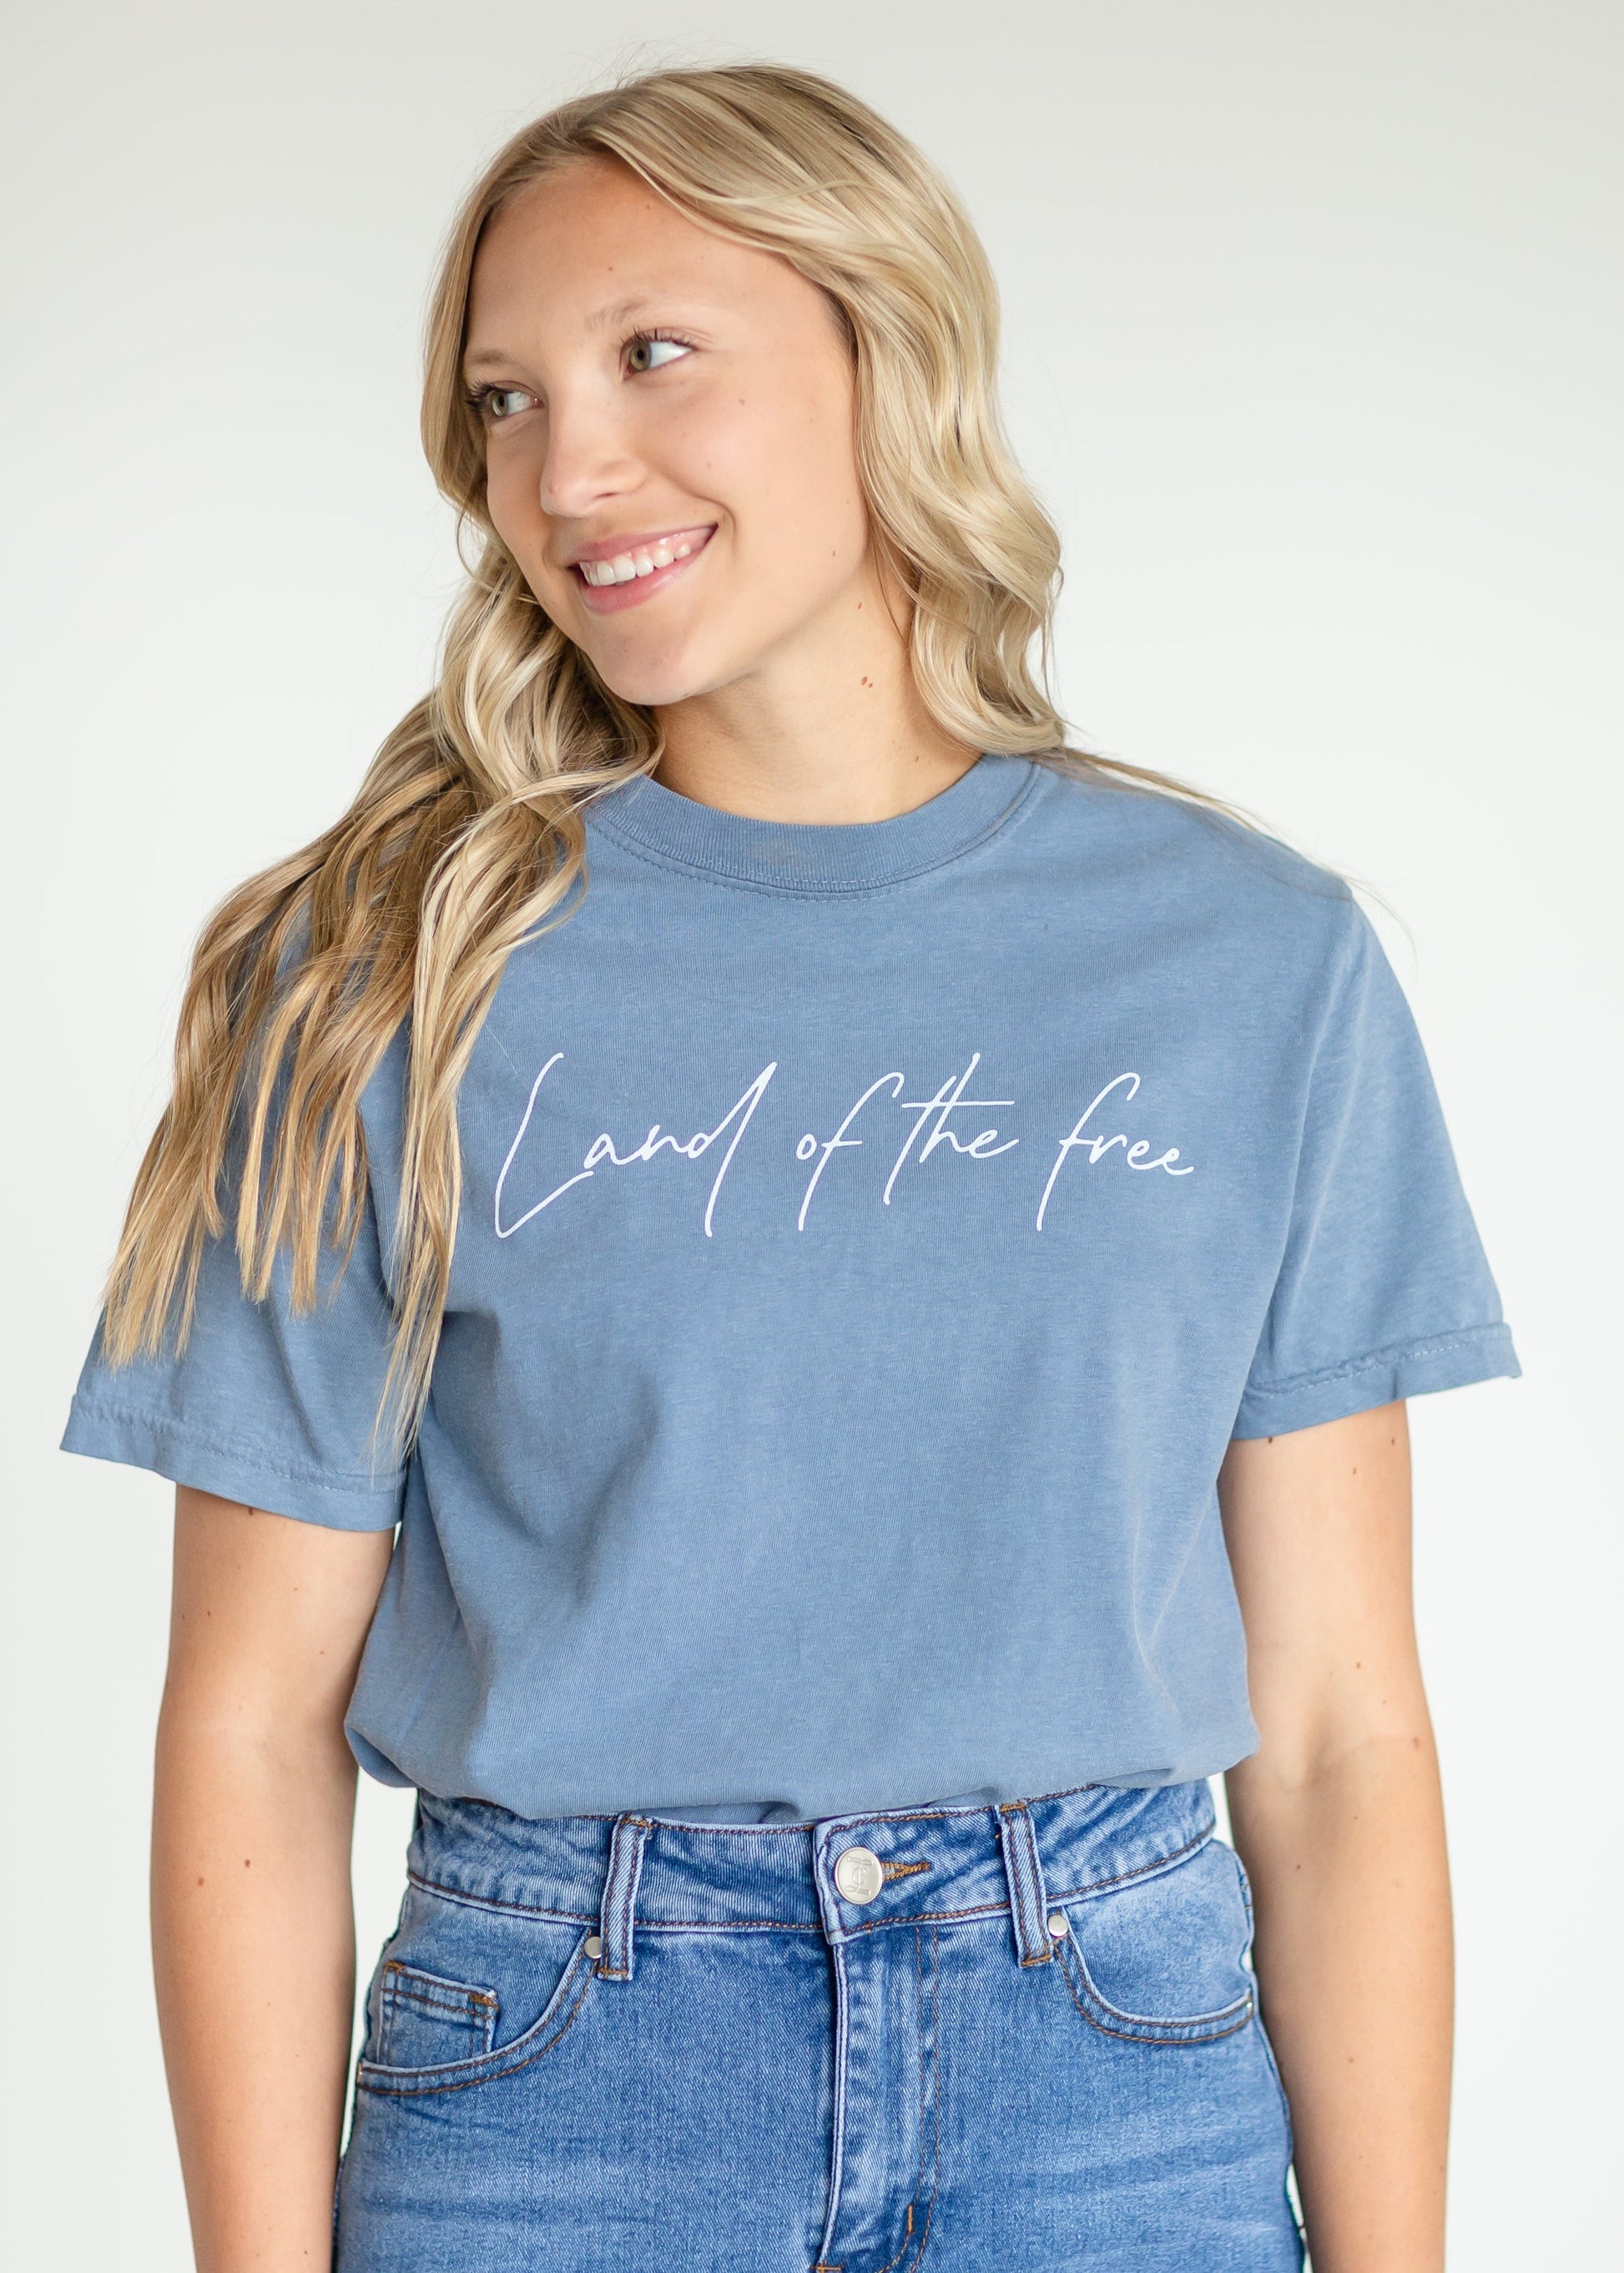 Land of the Free Graphic Tee Tops